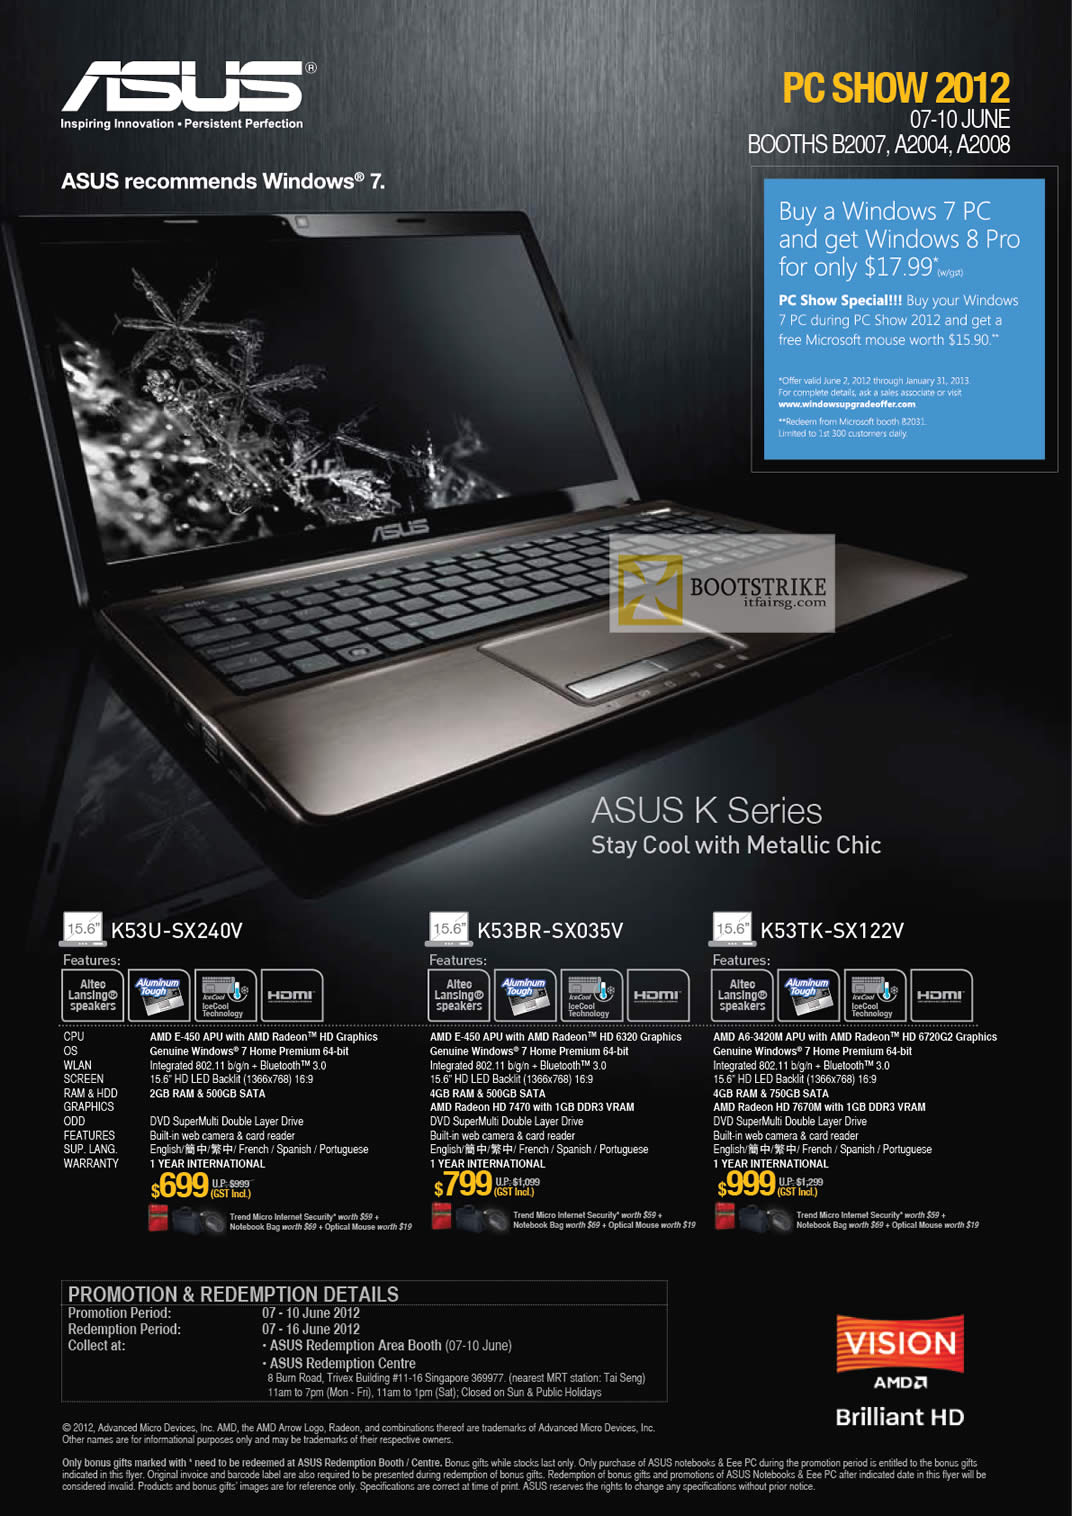 PC SHOW 2012 price list image brochure of ASUS Notebooks K Series AMS K53U-SX240V, K53BR-SX035V, K53TK-SX122V